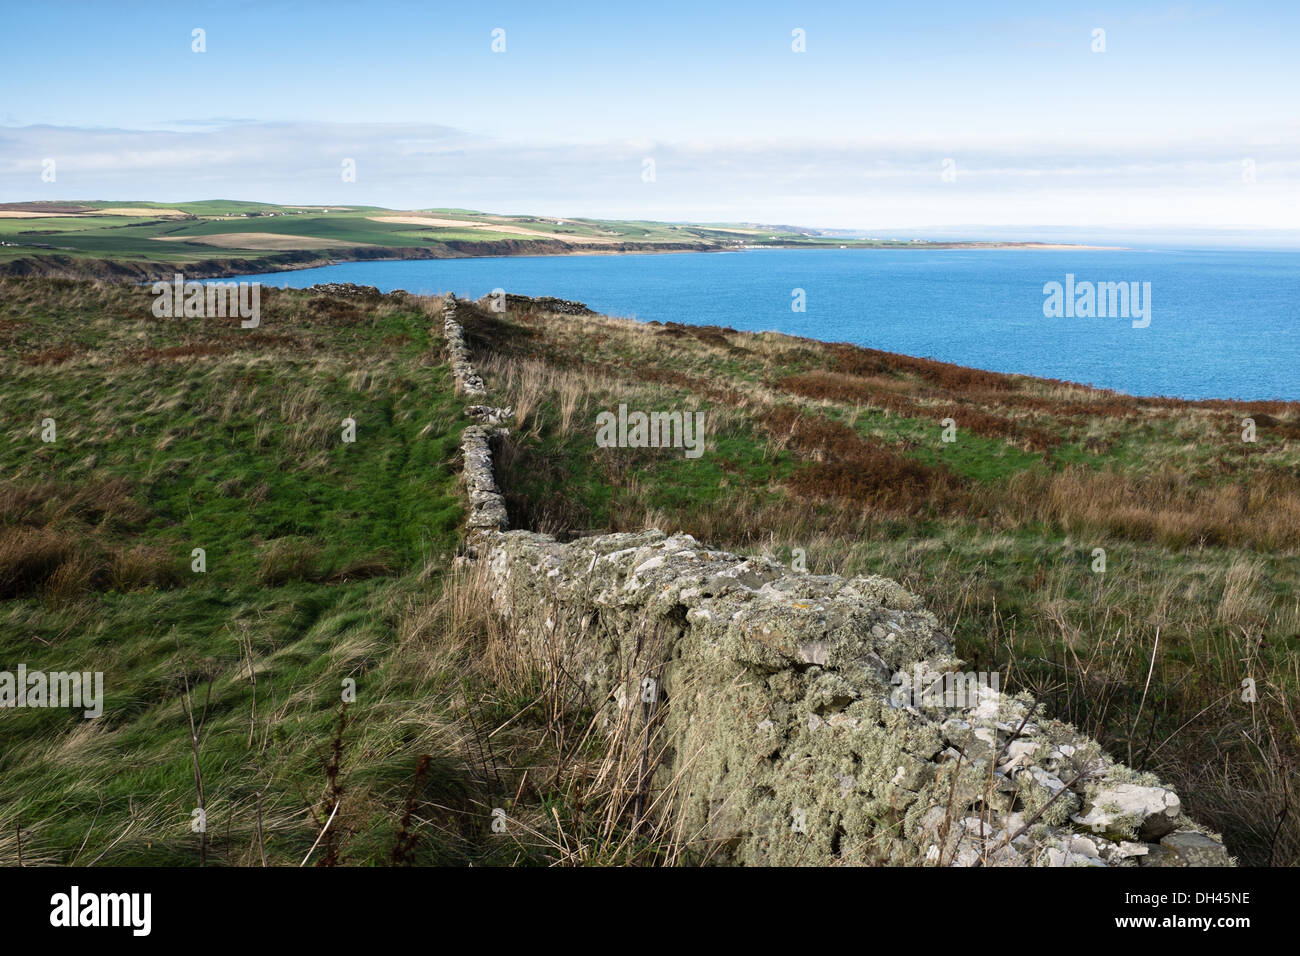 Looking north across Luce Bay from the Mull of Galloway. Luce Bay is an MOD Danger Area due to unexploded ordinance Stock Photo